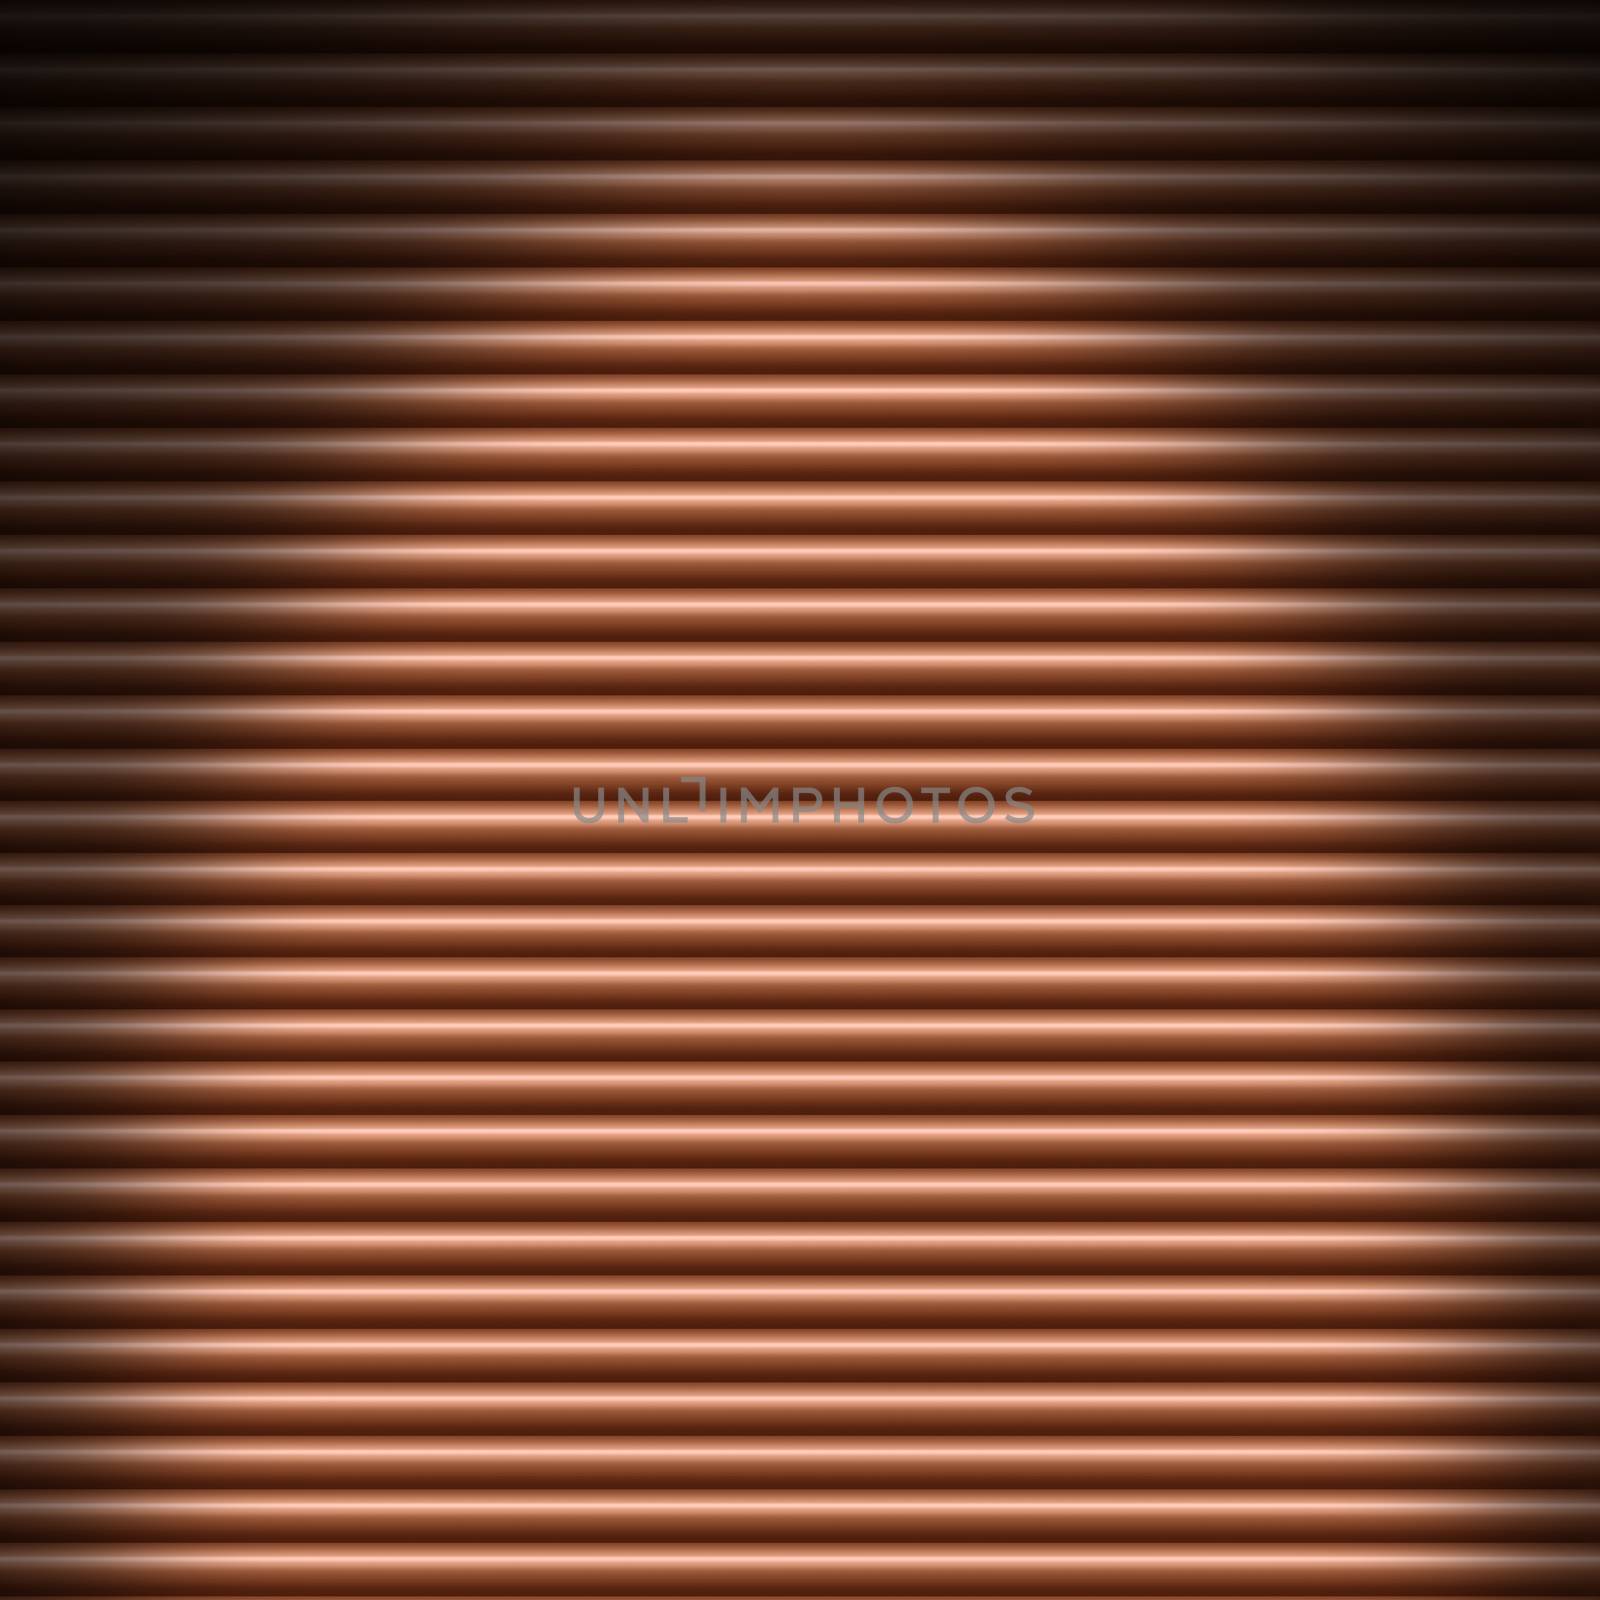 Horizontal copper-colored tube background texture lit from above